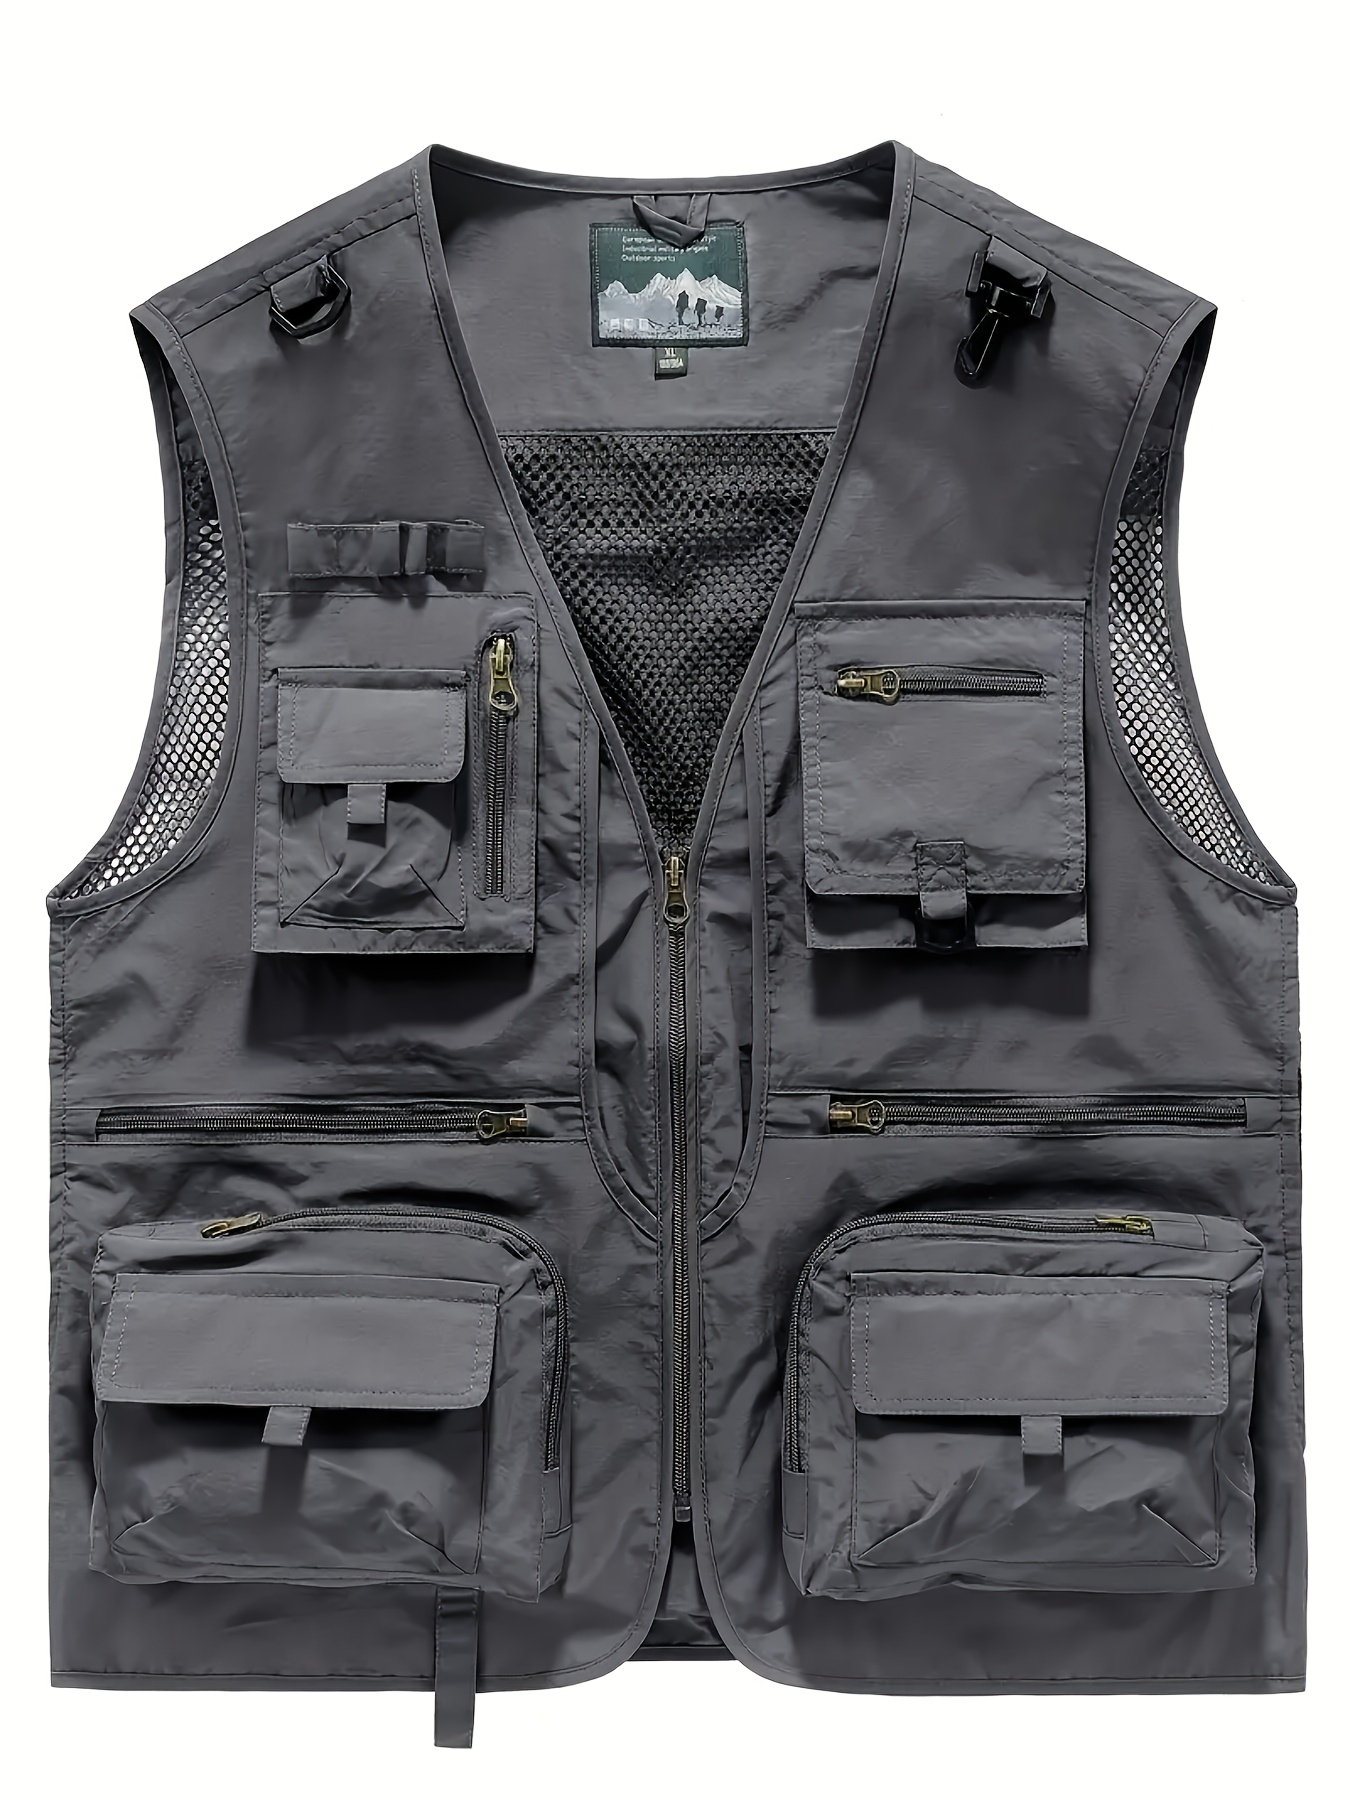 mens casual outdoor vest multi pocket utility fishing vest with zipper breathable mesh workwear waistcoat for hiking hunting camping